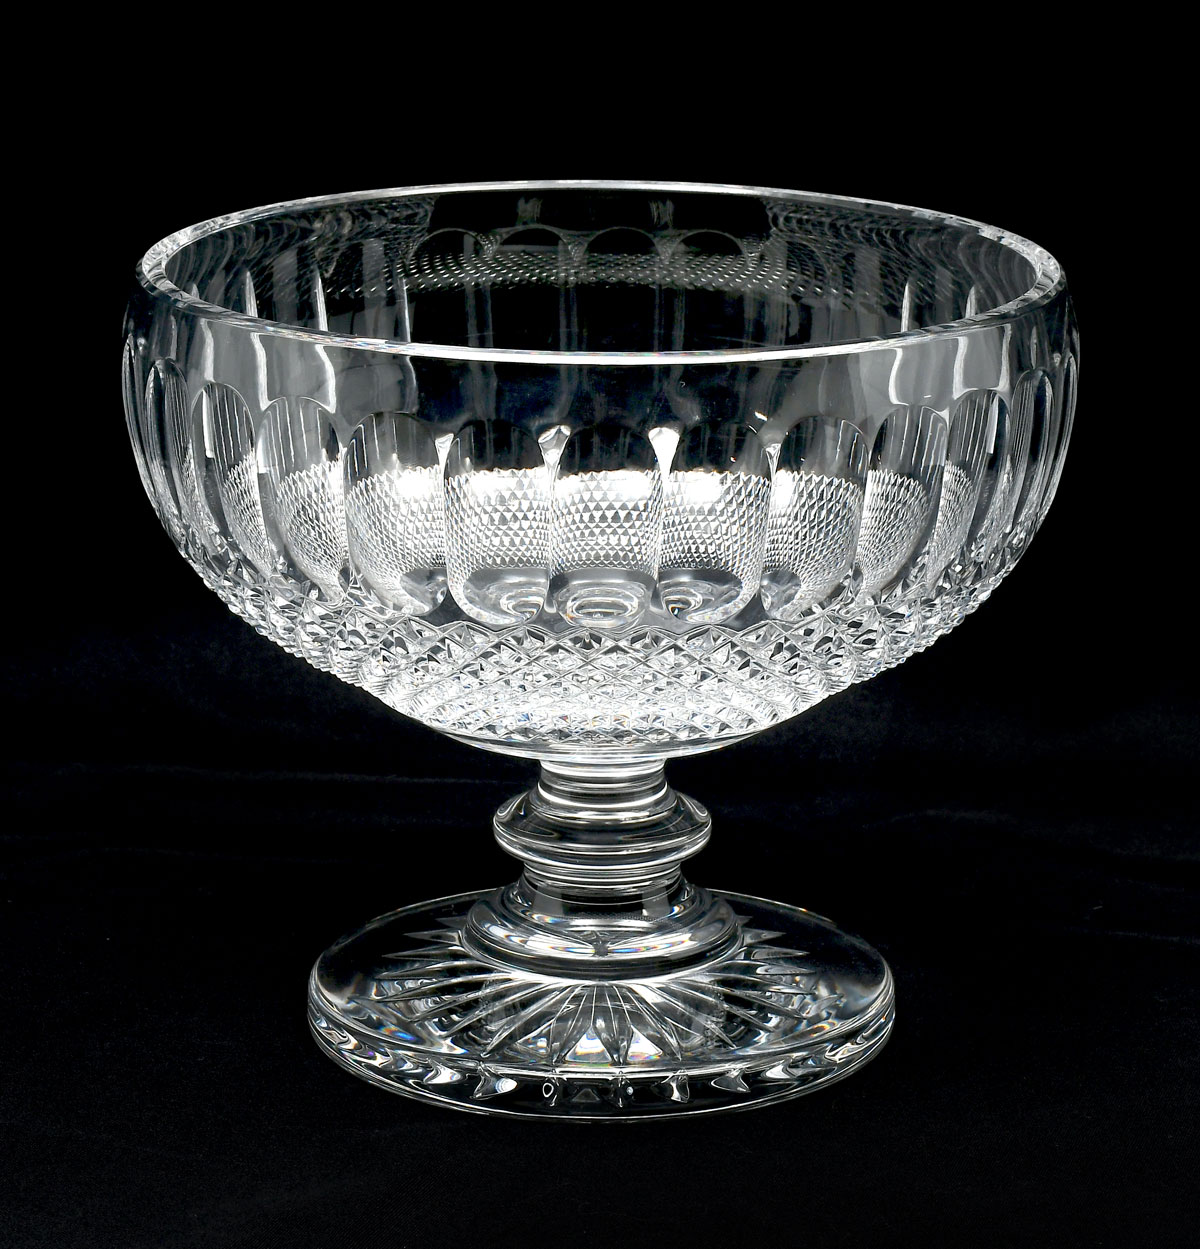 WATERFORD PUNCH BOWL: Waterford